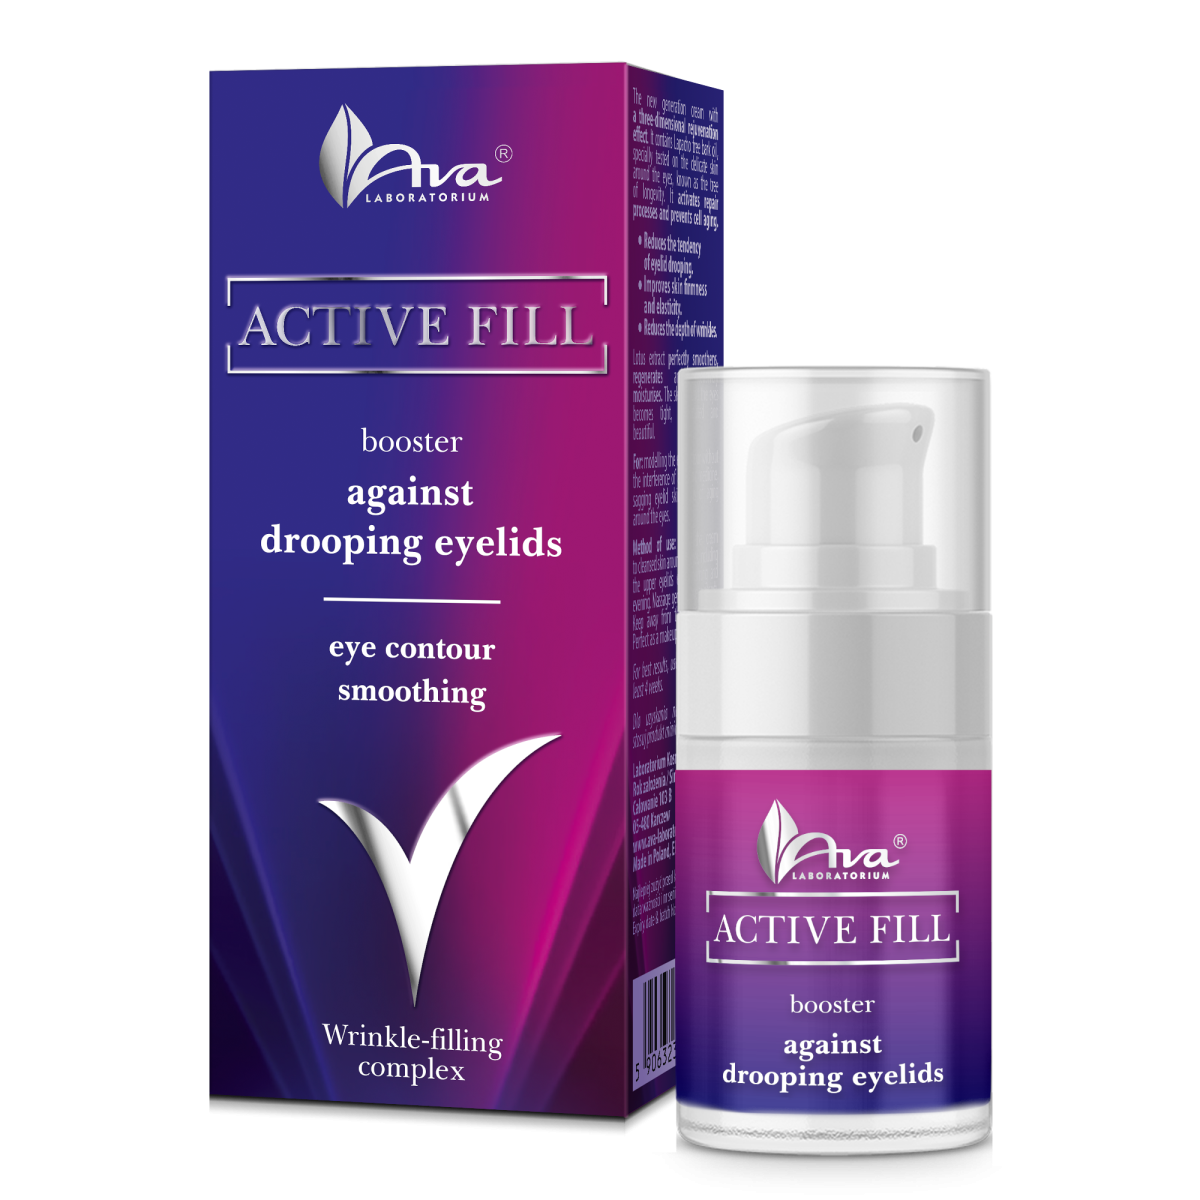 Active Fill – Eye-contour smoothing against drooping eyelids